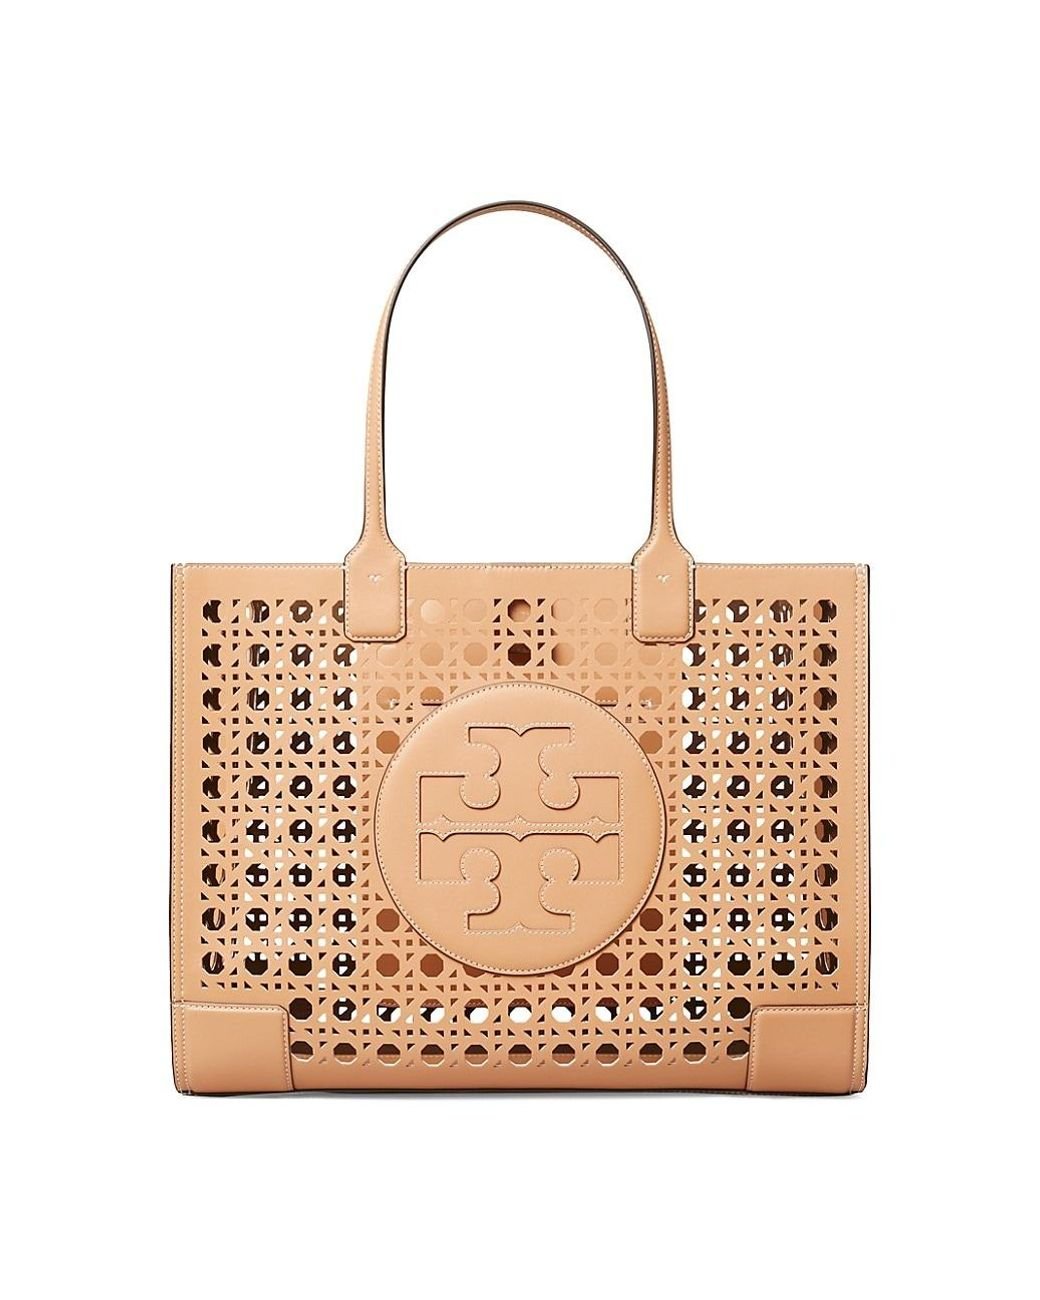 Tory Burch Ella Woven Leather Tote in Beige (Natural) - Lyst